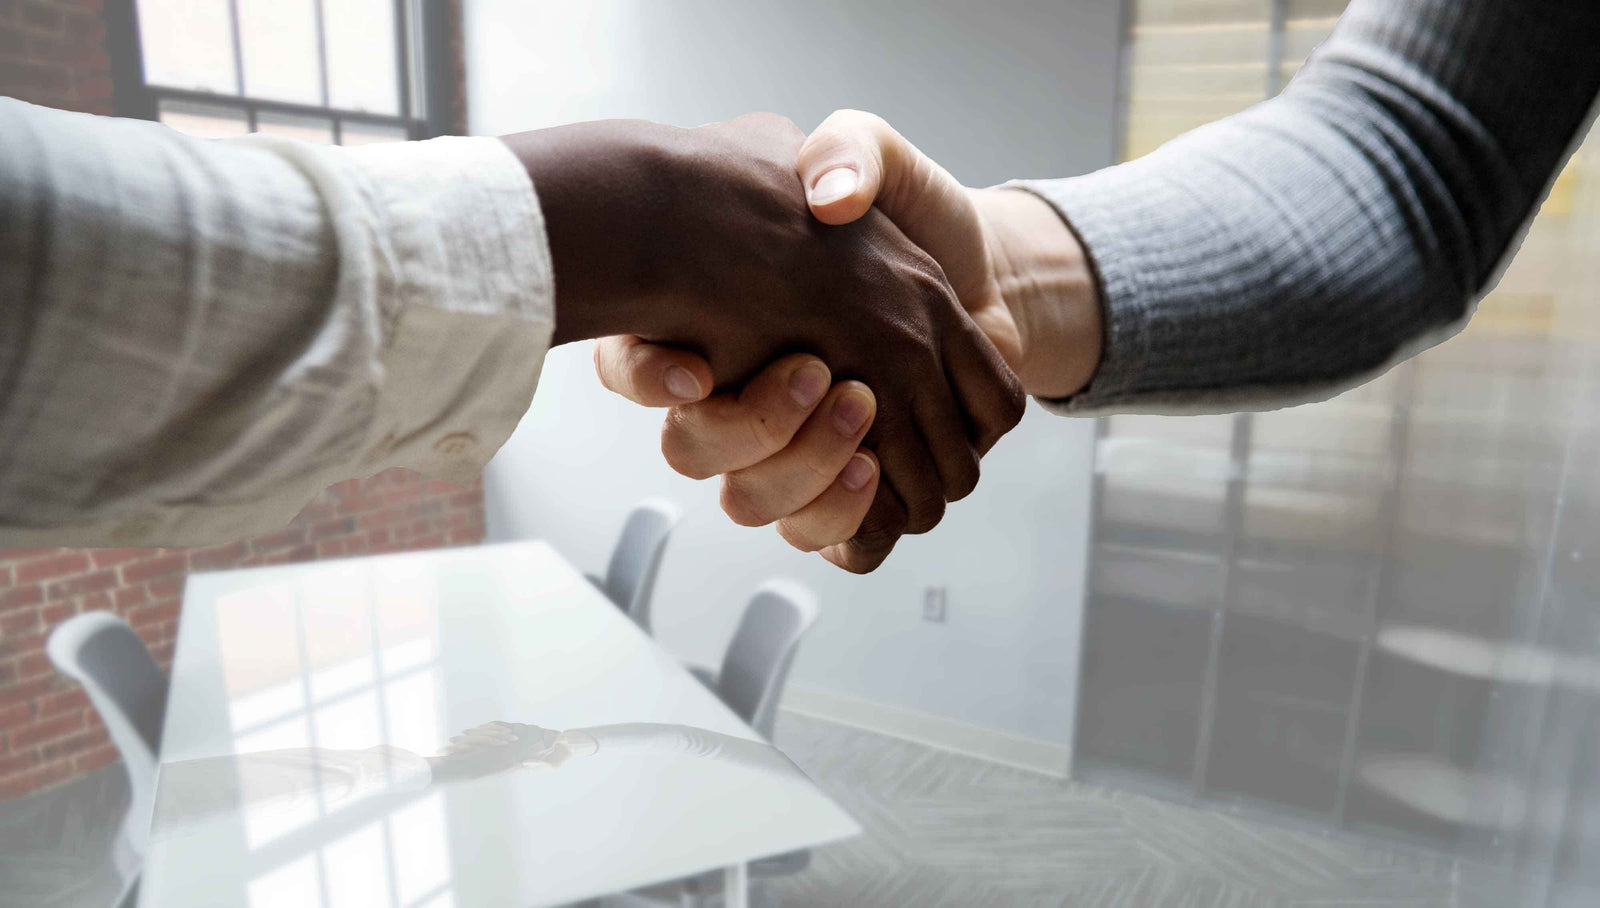 how to stop sweating in an interview - shaking hands